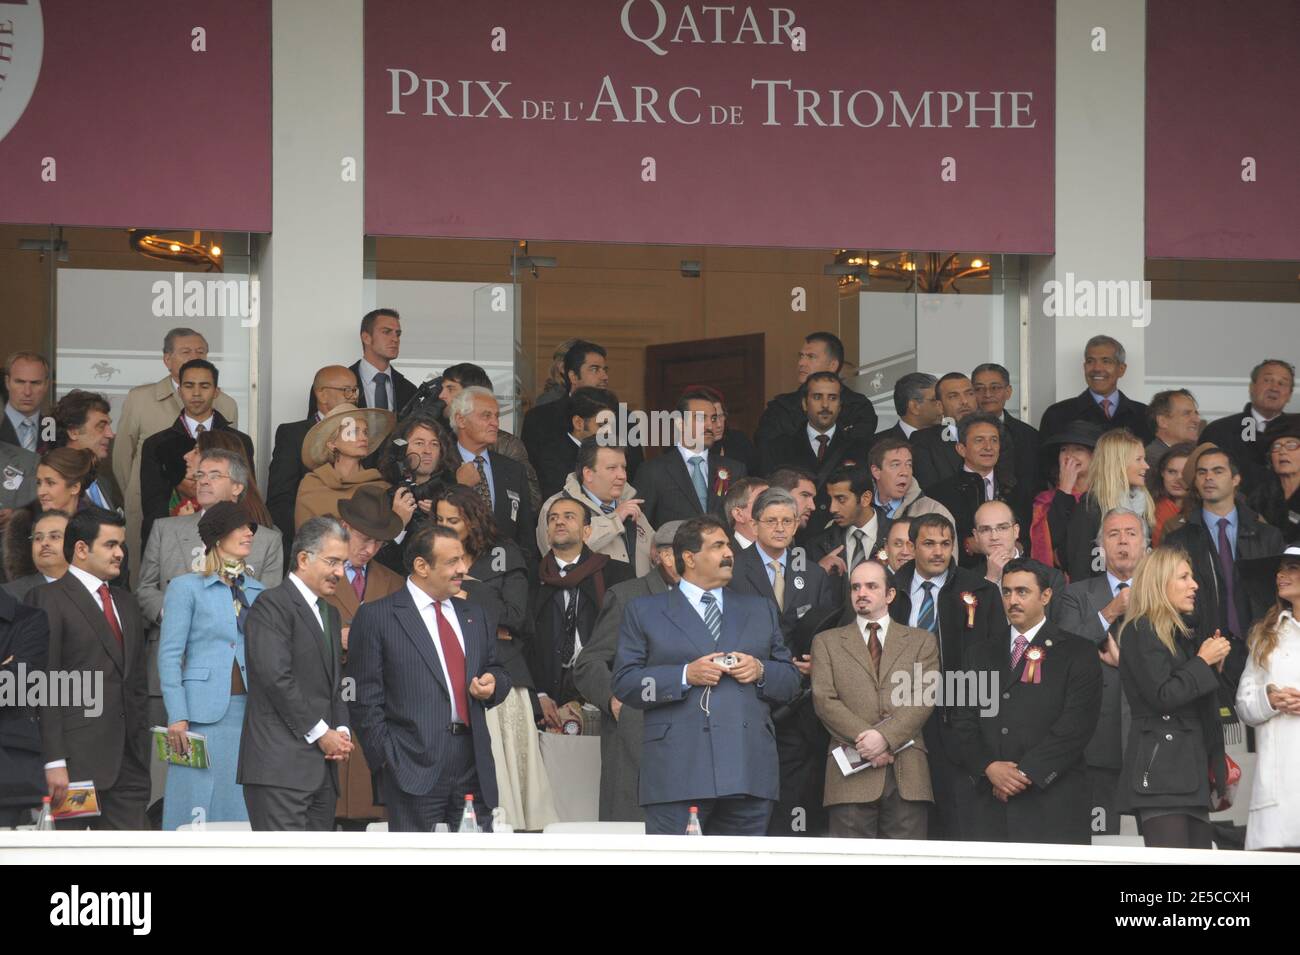 Qatar's Emir Sheikh Hamad Bin Khalifa Al Thani (R) is seen at the 'Presidential Stand' at 87th Arc de Triomphe horserace, one of the world's richest races, at Longchamp Racecourse, near Paris, France, on October 5, 2008. The race, that was sponsored by Qatar for the first time, was won by Aga Khan's horse Zarkava. Photo by Ammar Abd Rabbo/ABACAPRESS.COM Stock Photo